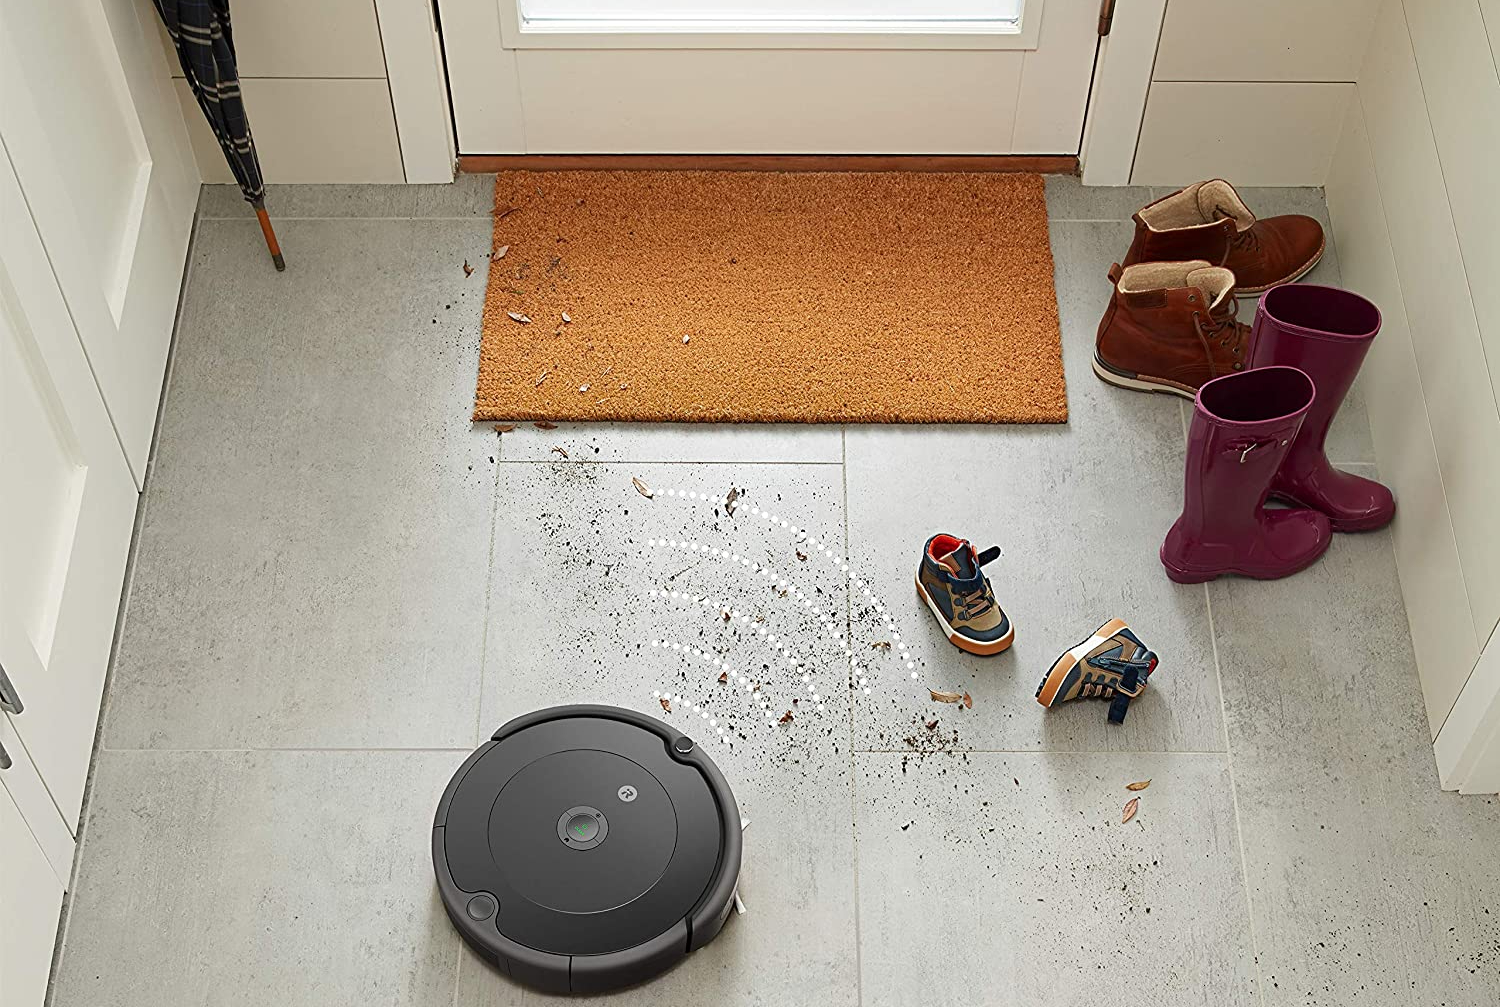 This is the cheapest Roomba robot vacuum worth buying today